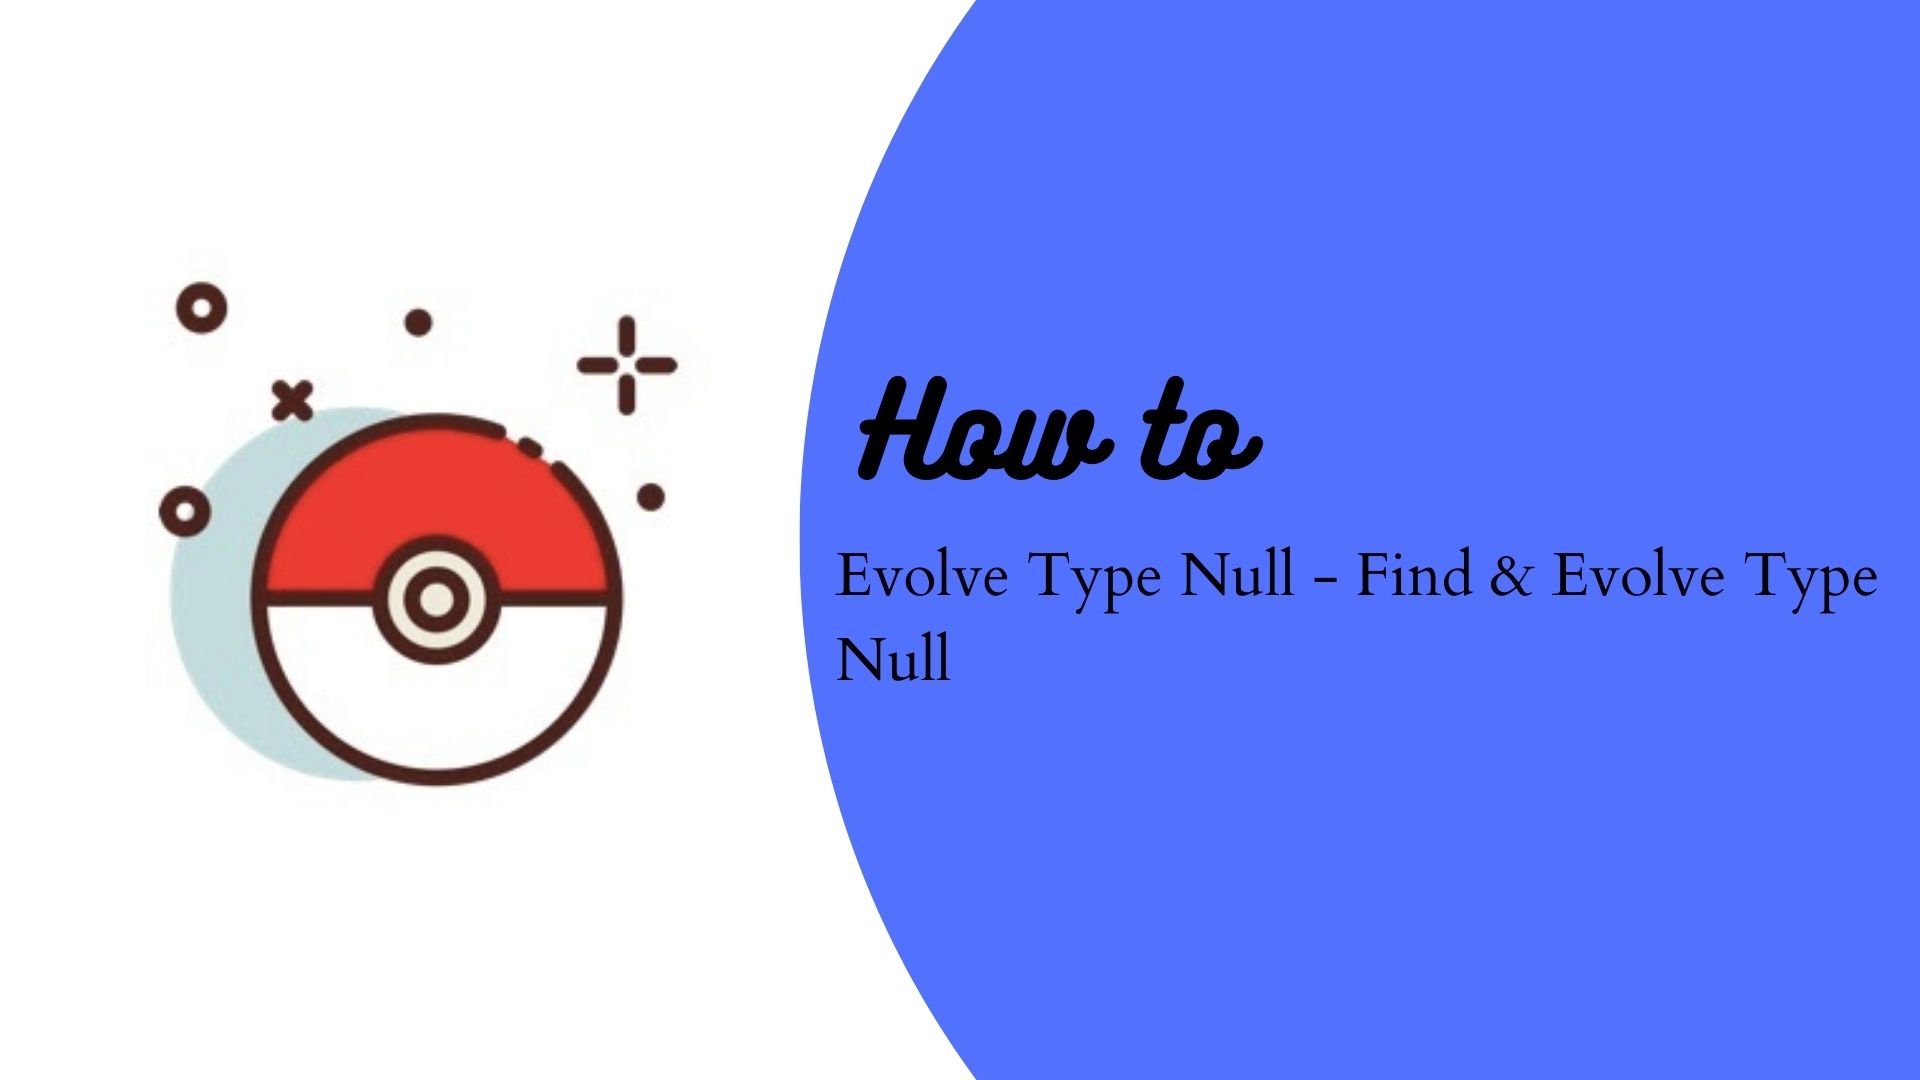 How to do Evolve Type Null – Find & Evolve Type Null